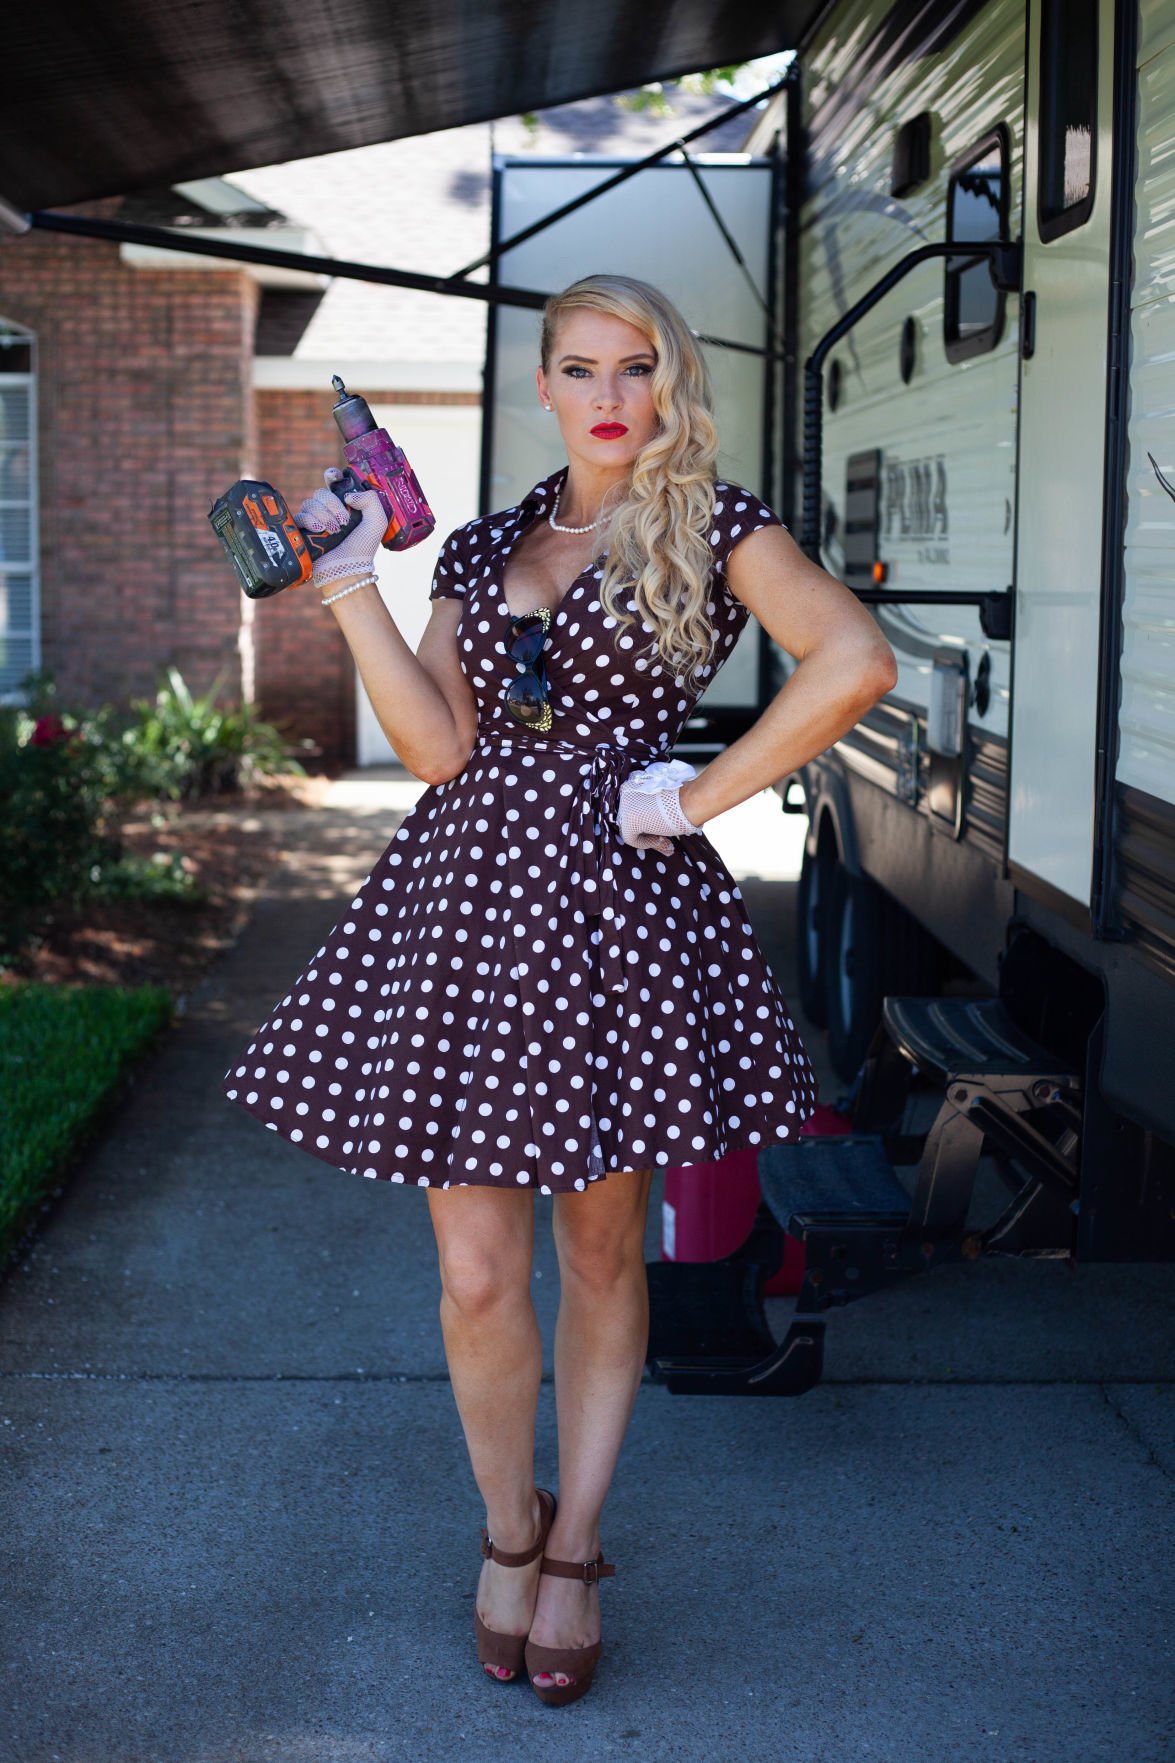 Lacey Evans: the classy sassy Marine At Ease dcmilitary com